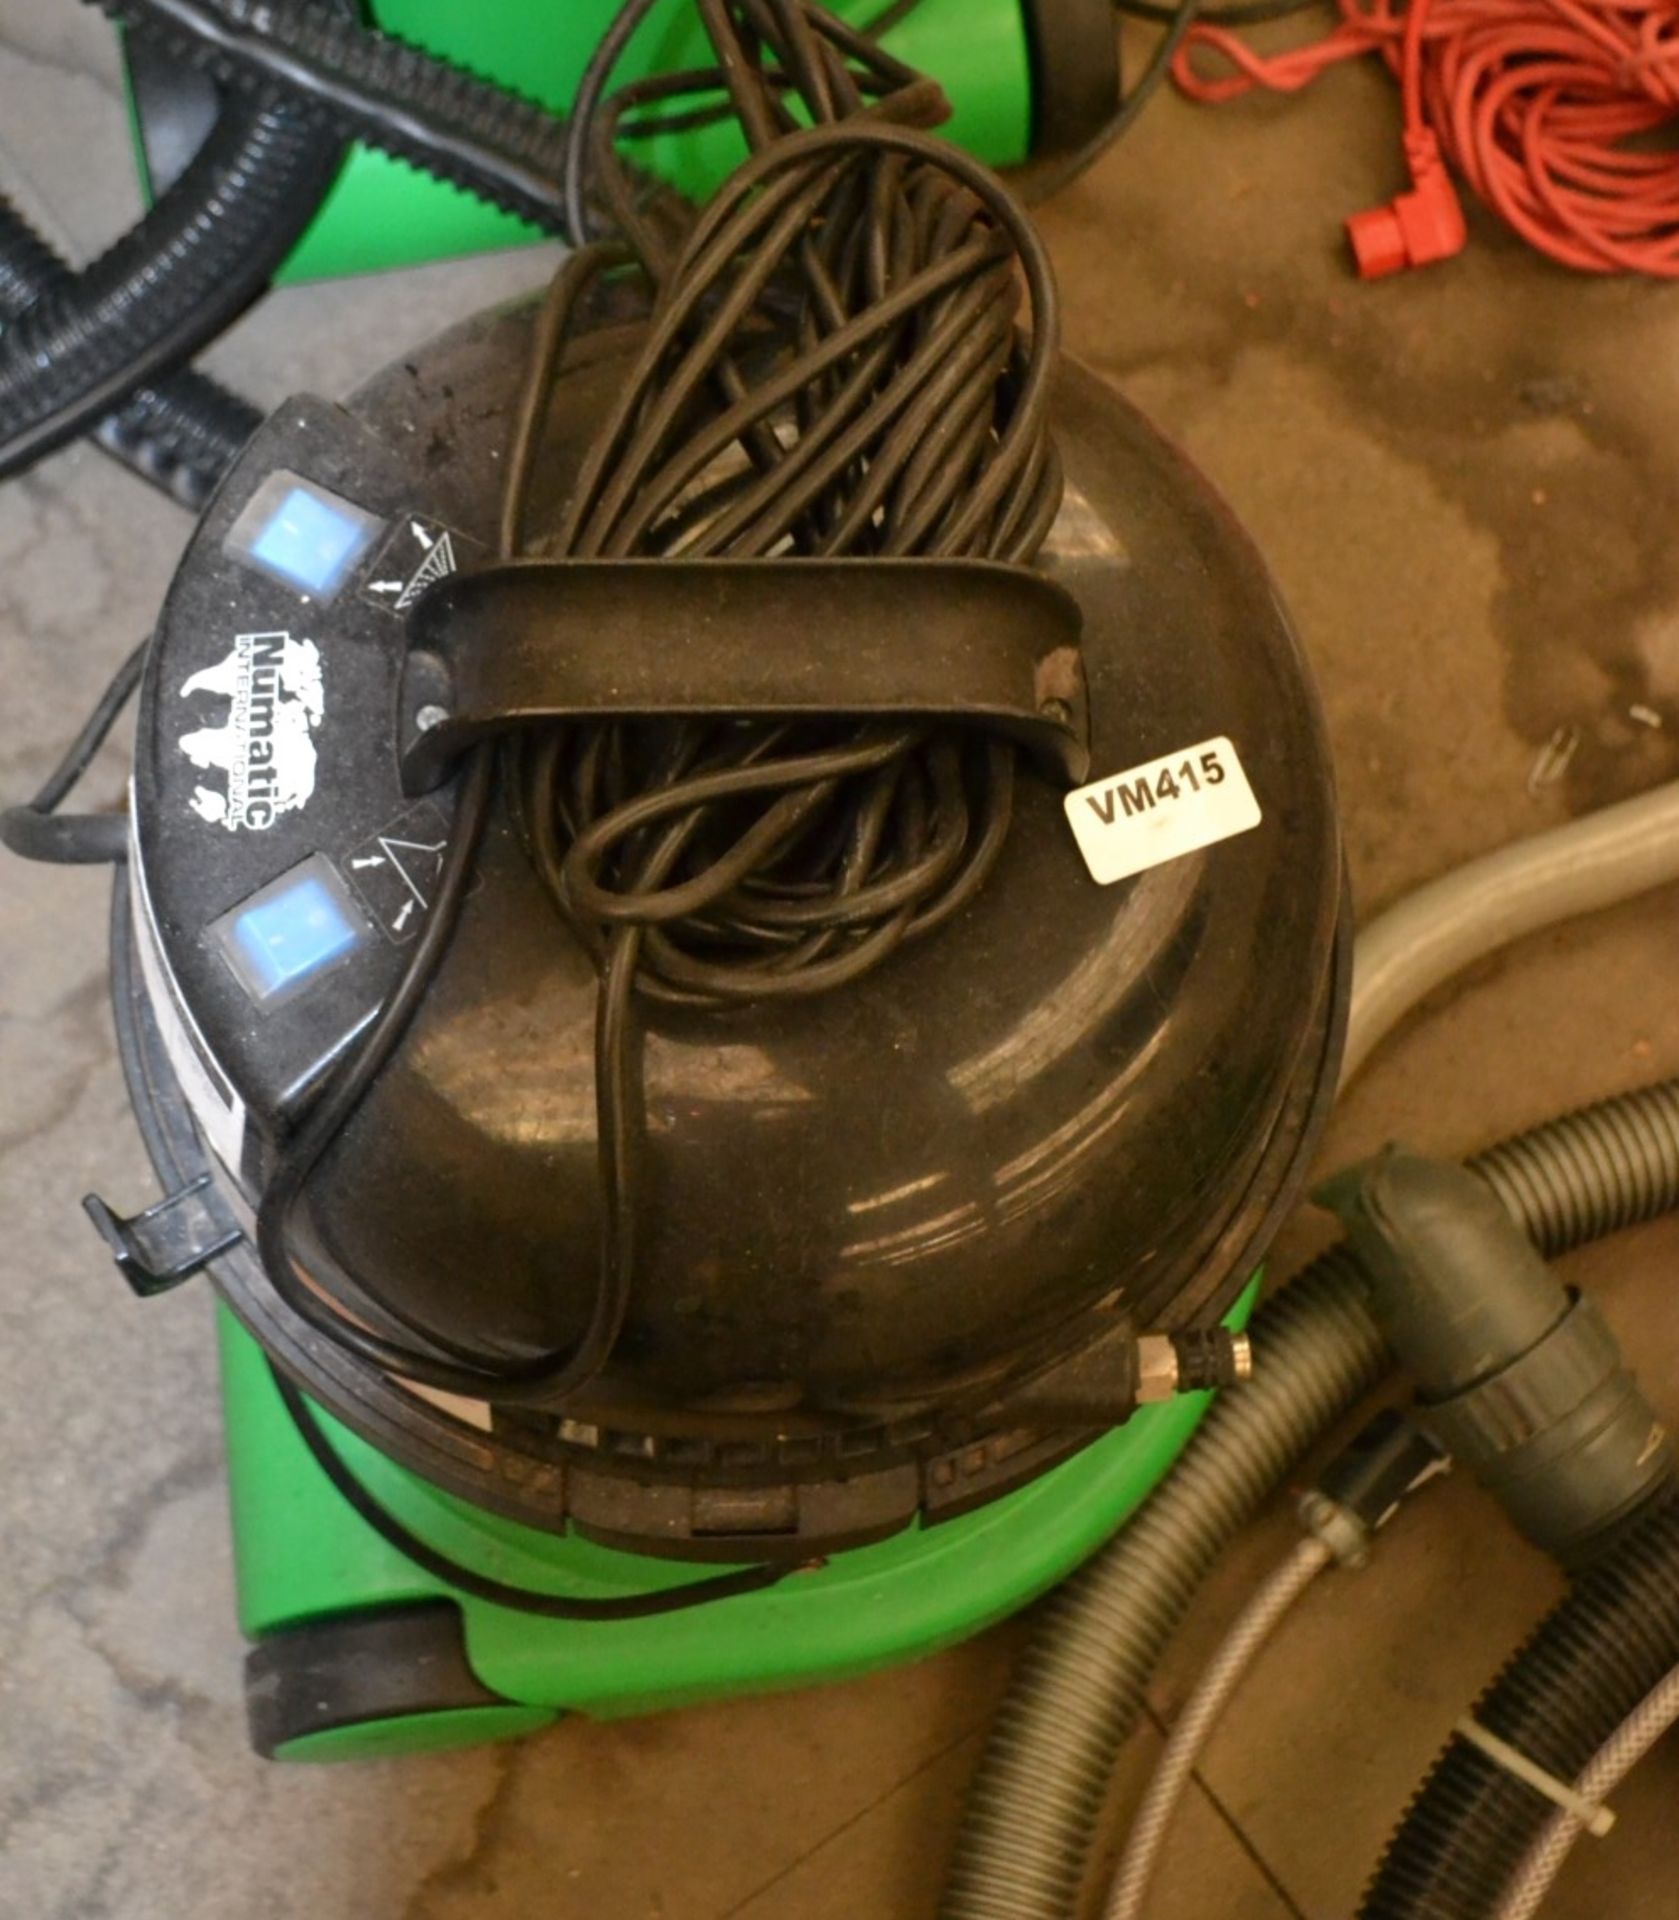 5 x Green Numatic Commercial Vacuum Cleaners GVE 370-2- Ref: VM415 - CL409 - Location: WF16 - Image 3 of 5